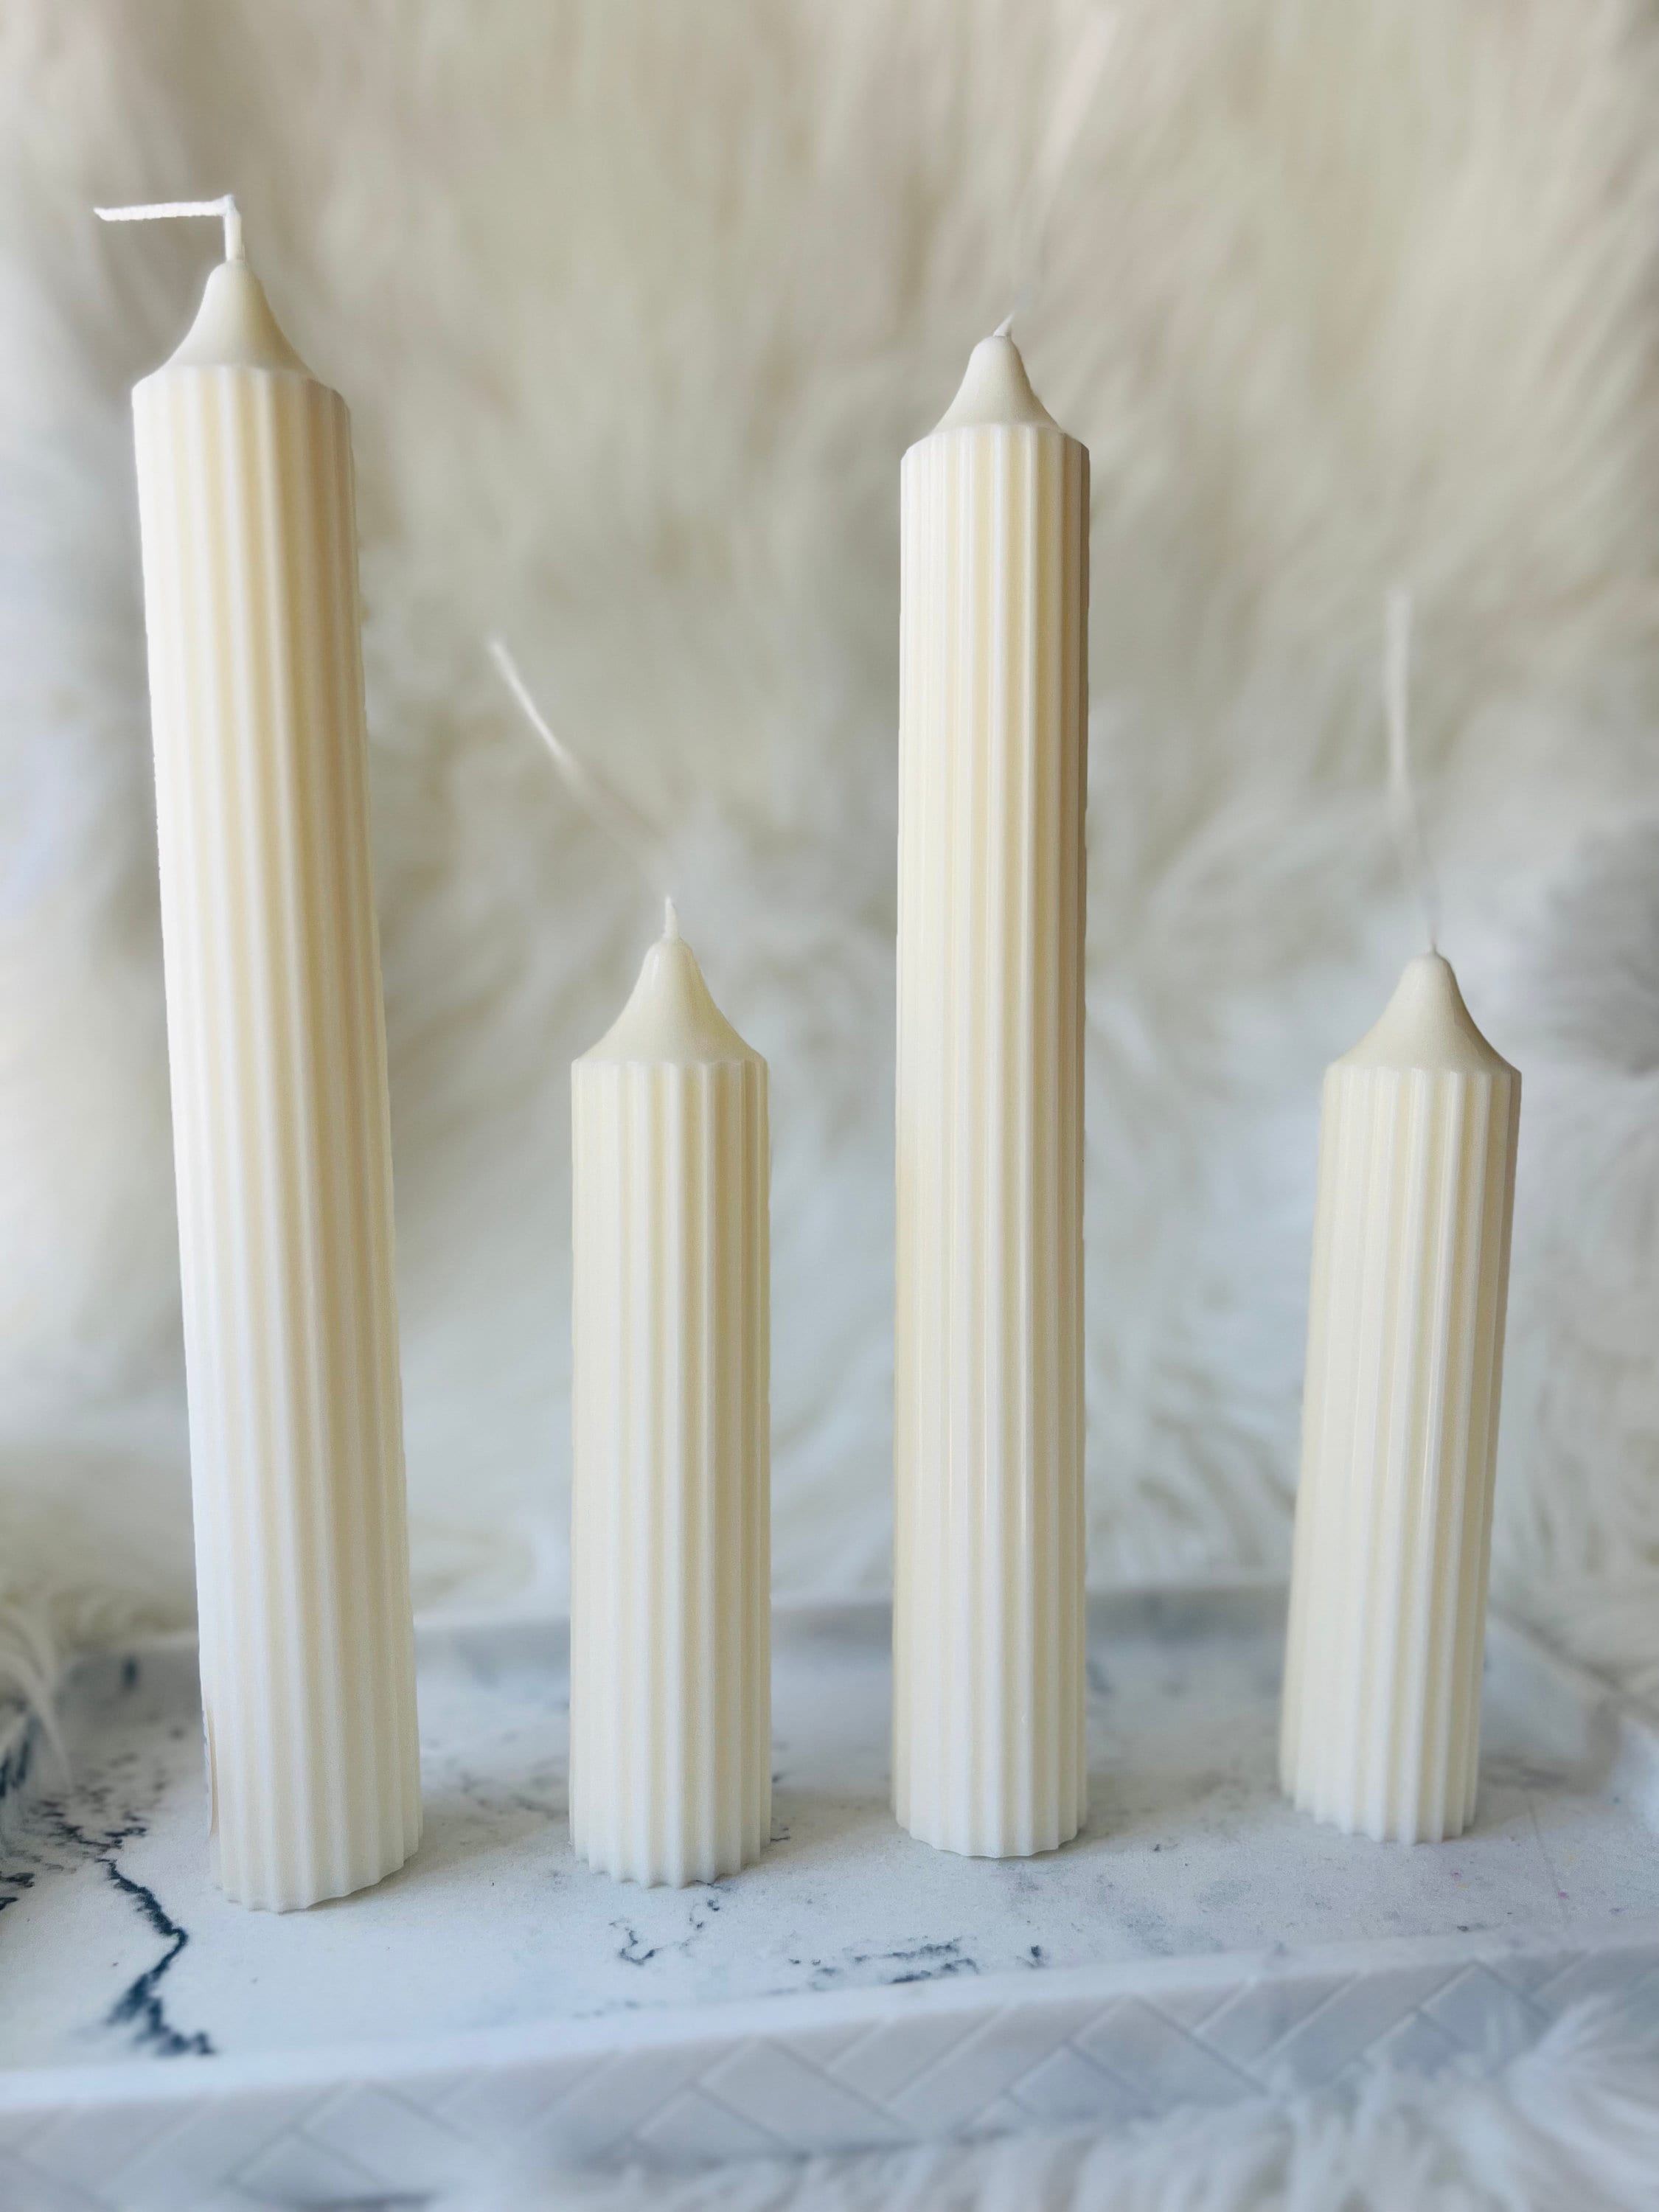 Candles for Wedding Favors 